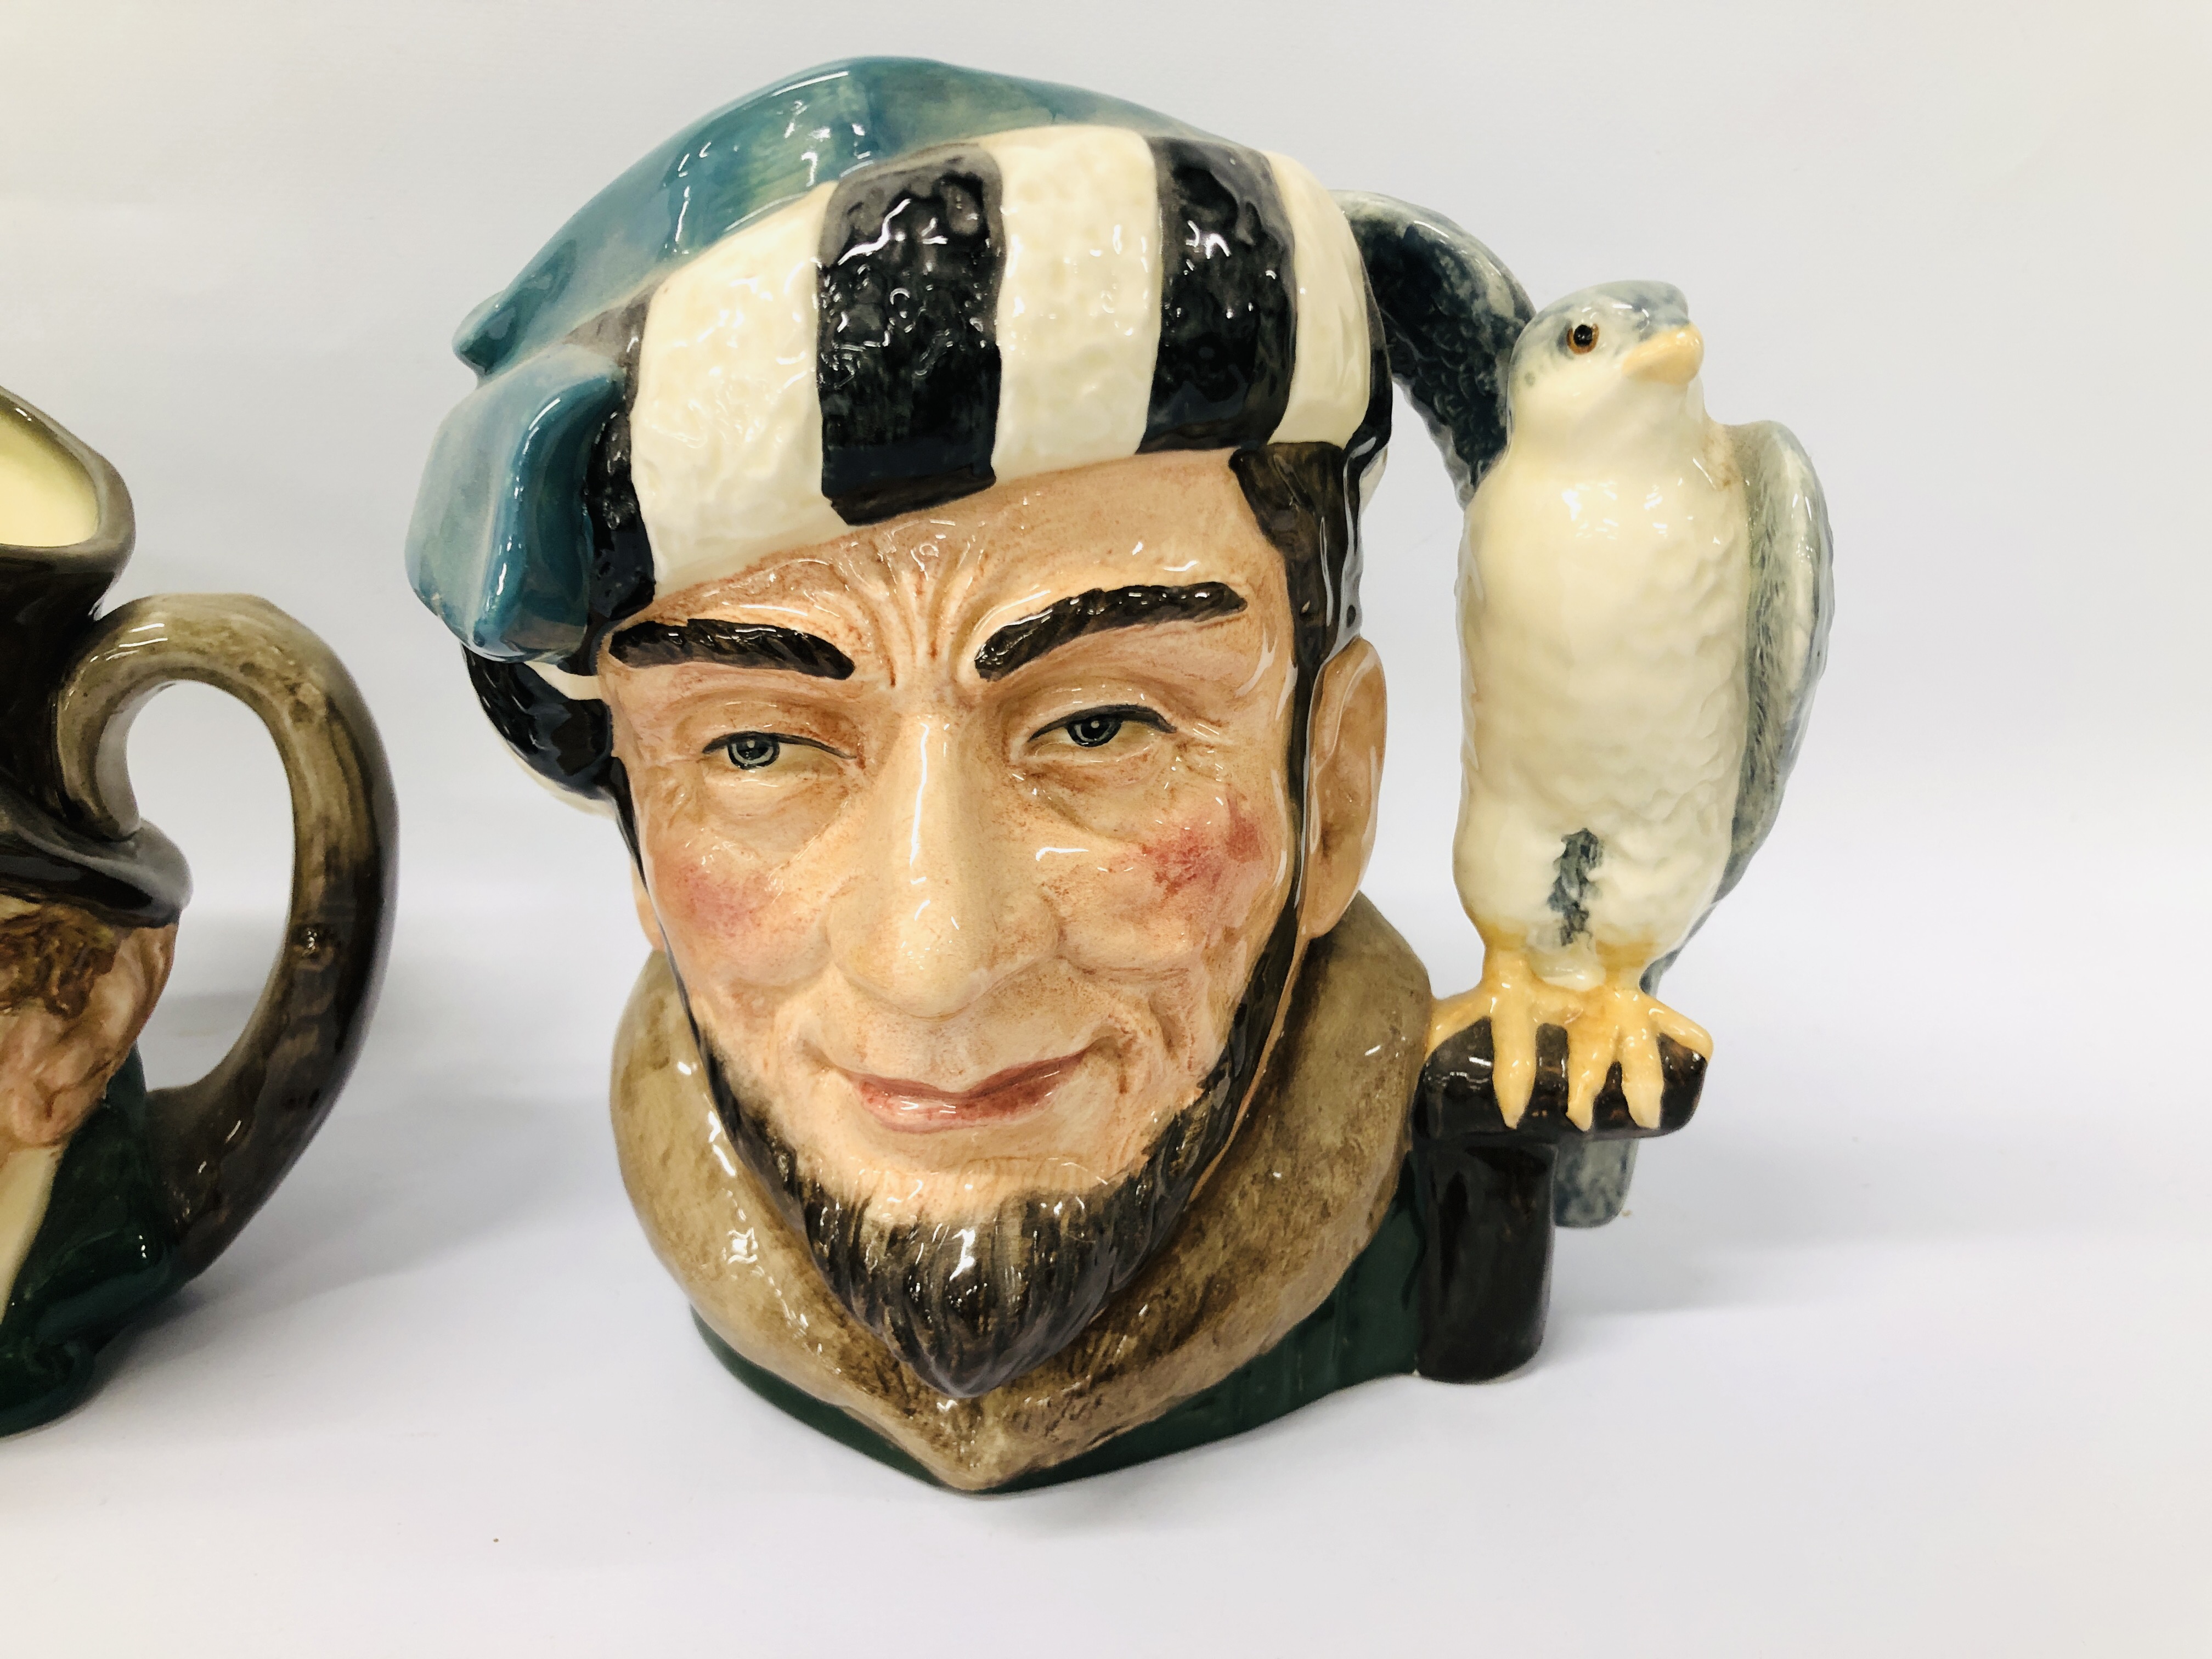 3 X ROYAL DOULTON CHARACTER JUGS TO INCLUDE "THE POACHER" - D 6429, THE FALCONER D 6533, - Image 2 of 8